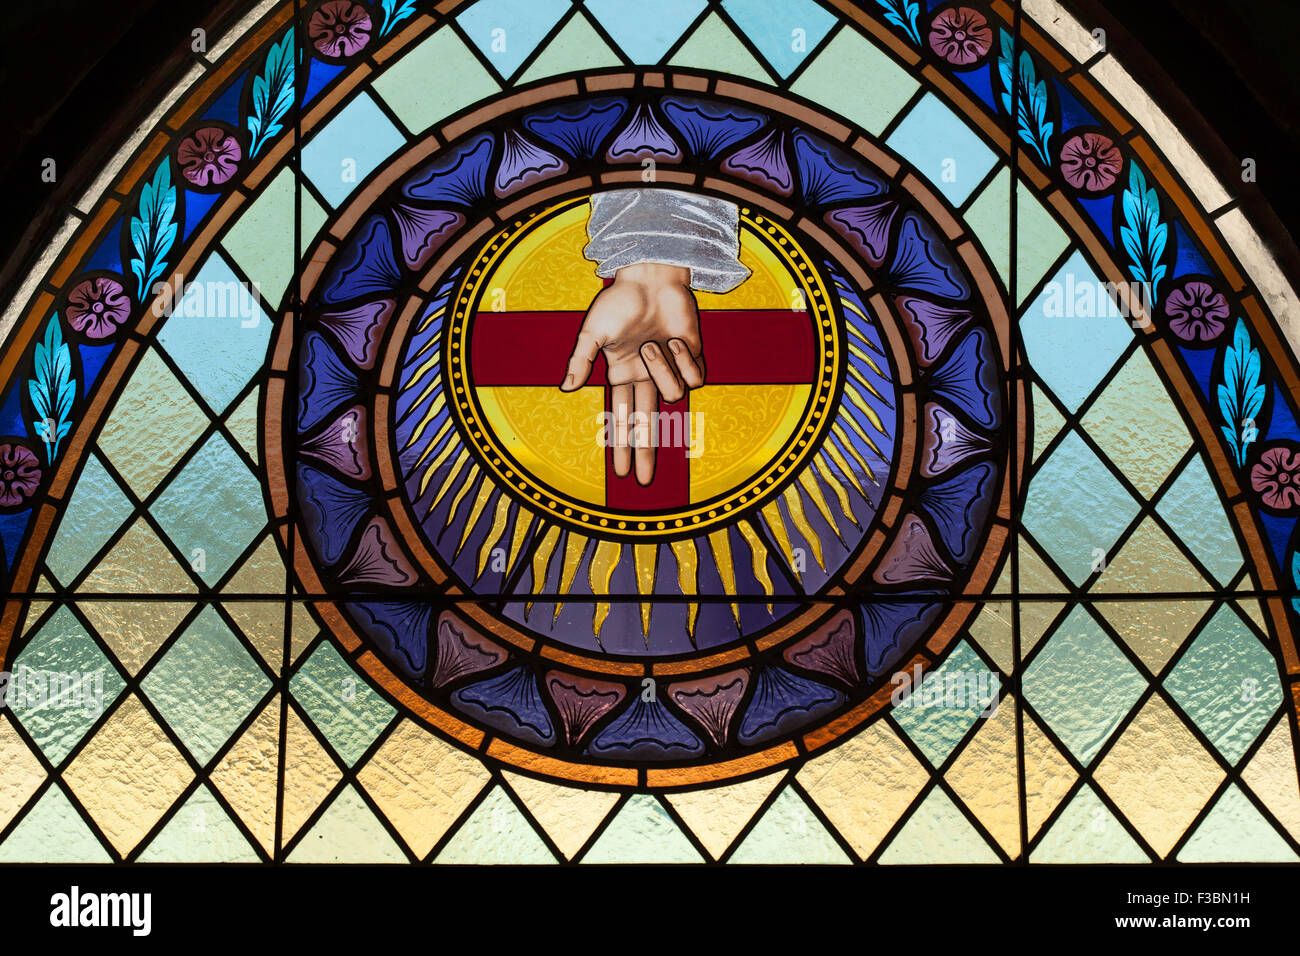 God the Father depicted as the Blessing Hand in the stained glass window by the Beuron Art School from the 1910s over the main e Stock Photo